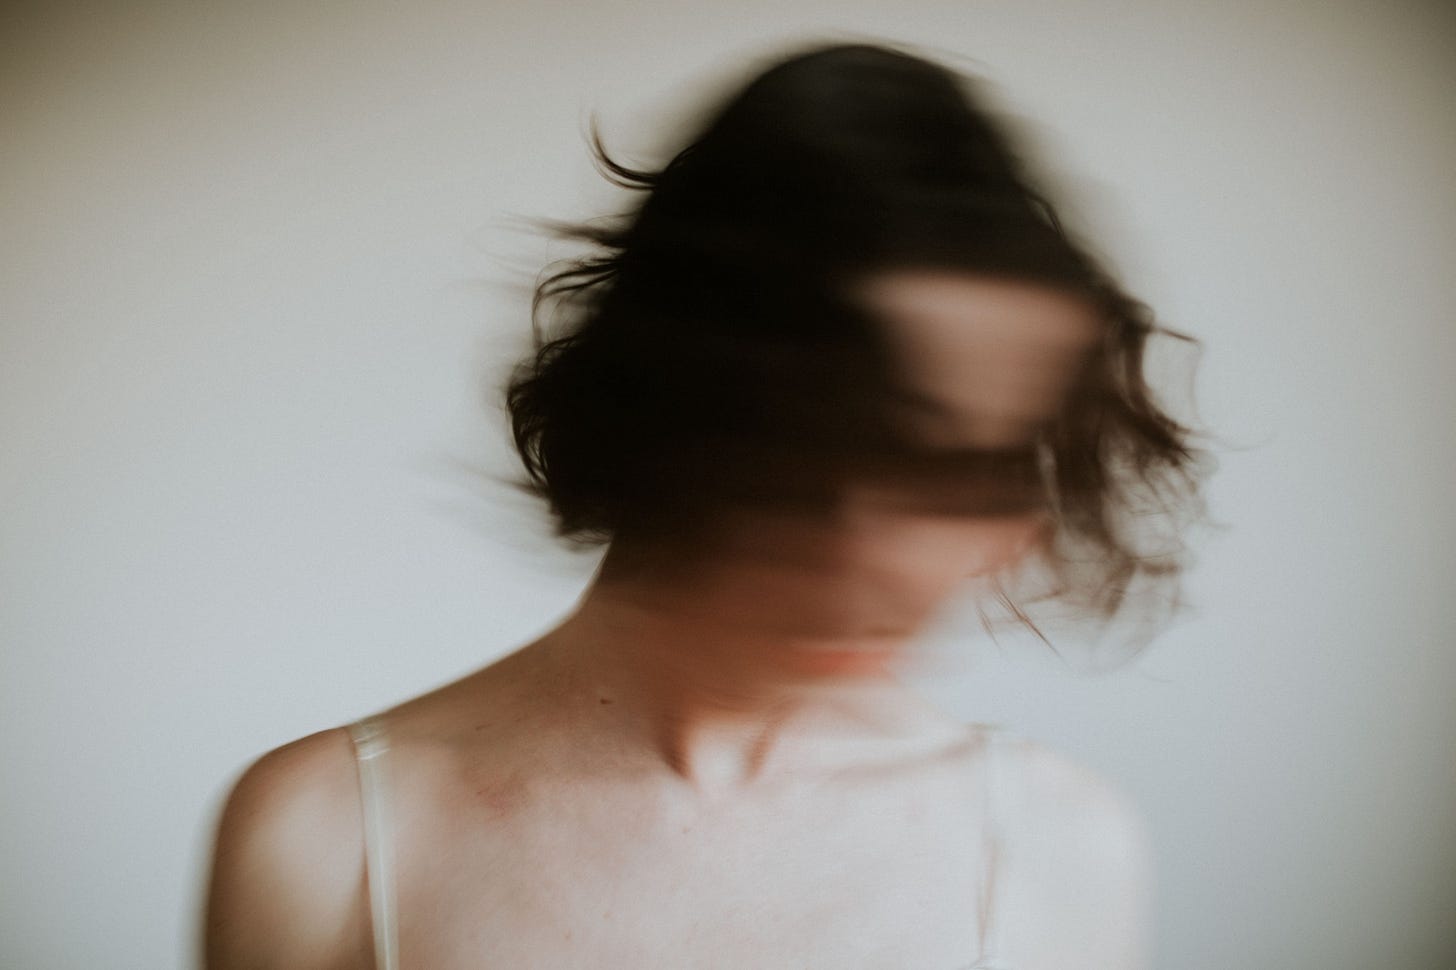 Blurred woman with dark hair shakes her head from side to side.